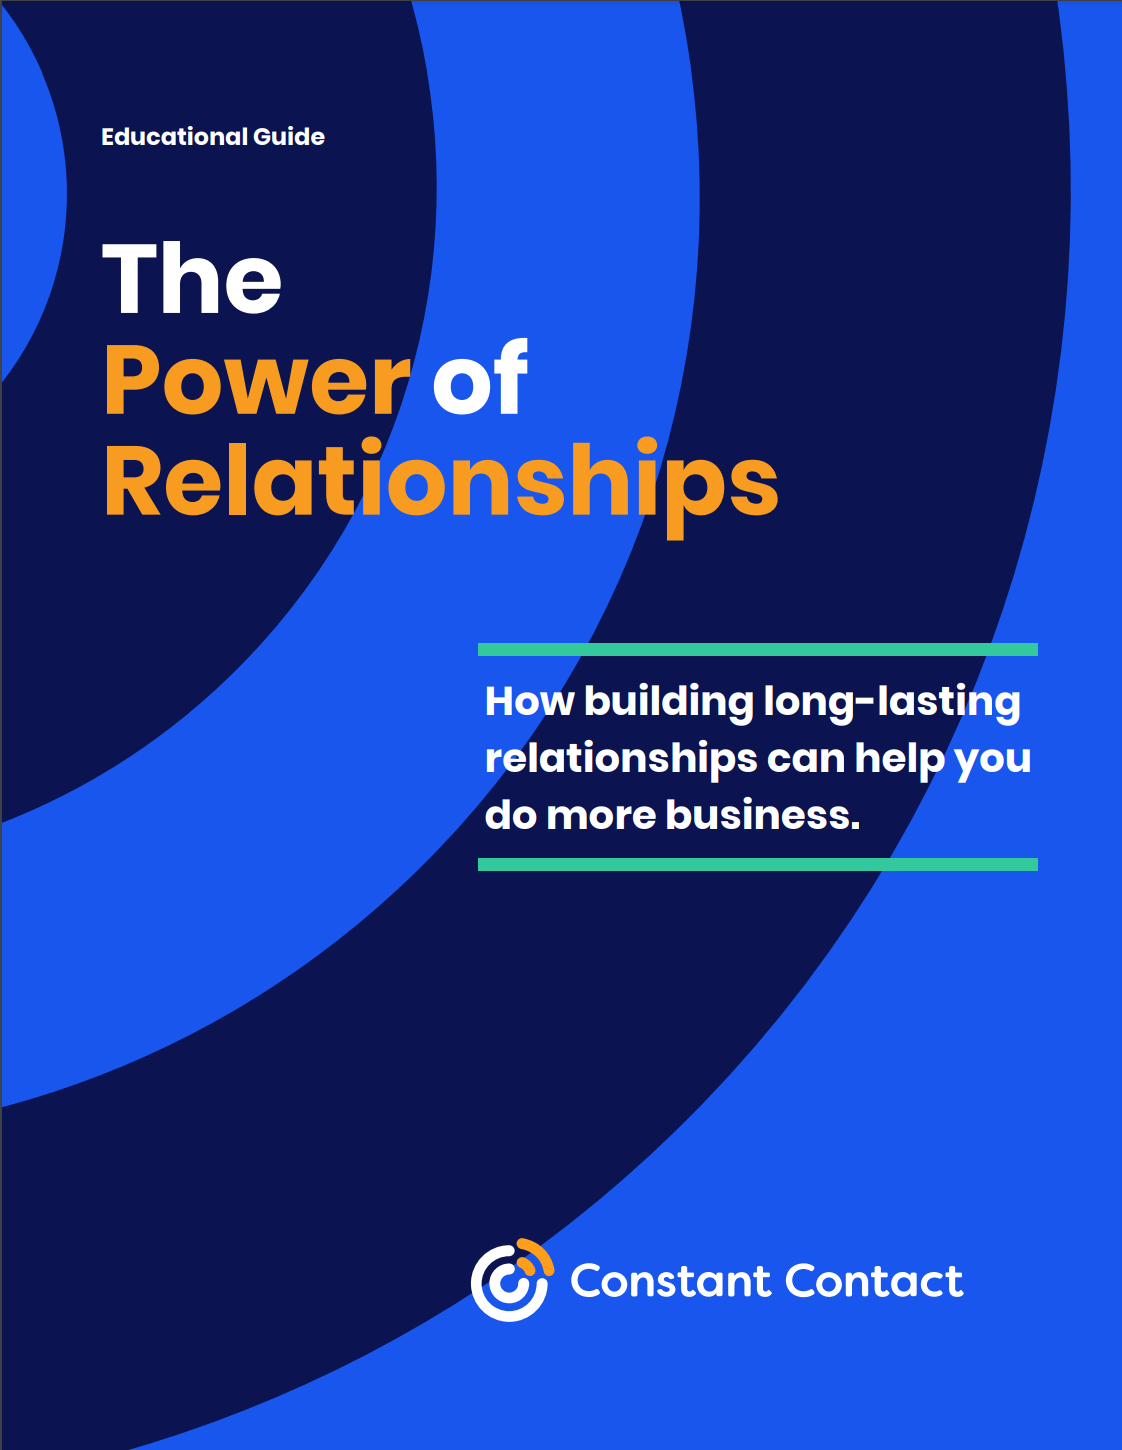 Constant Contact educational guide on The Power of Relationships